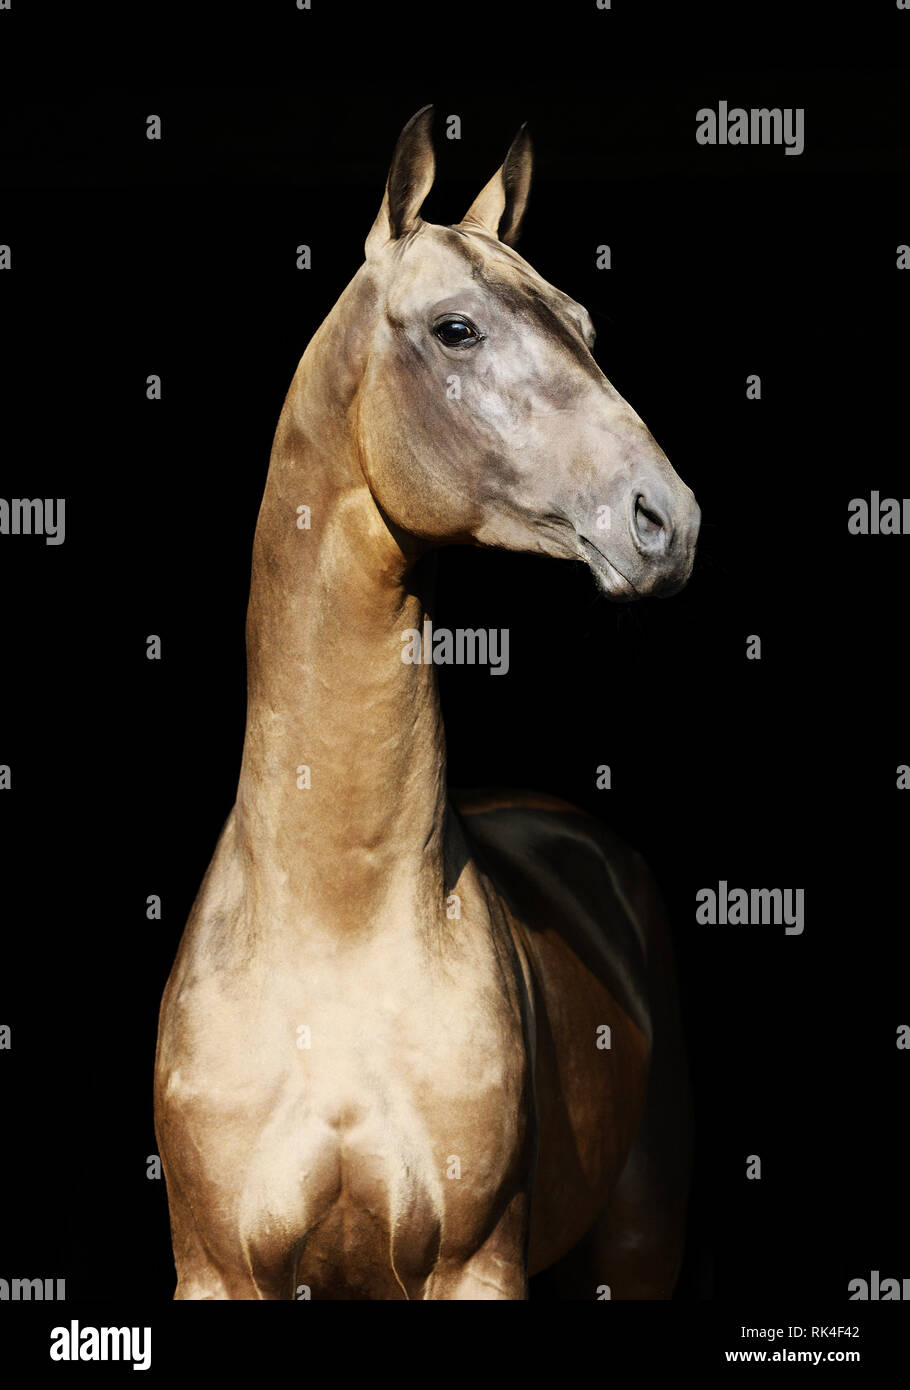 Shiny golden horse isolated on black background is looking to the right posing. Vertical, portrait. Stock Photo